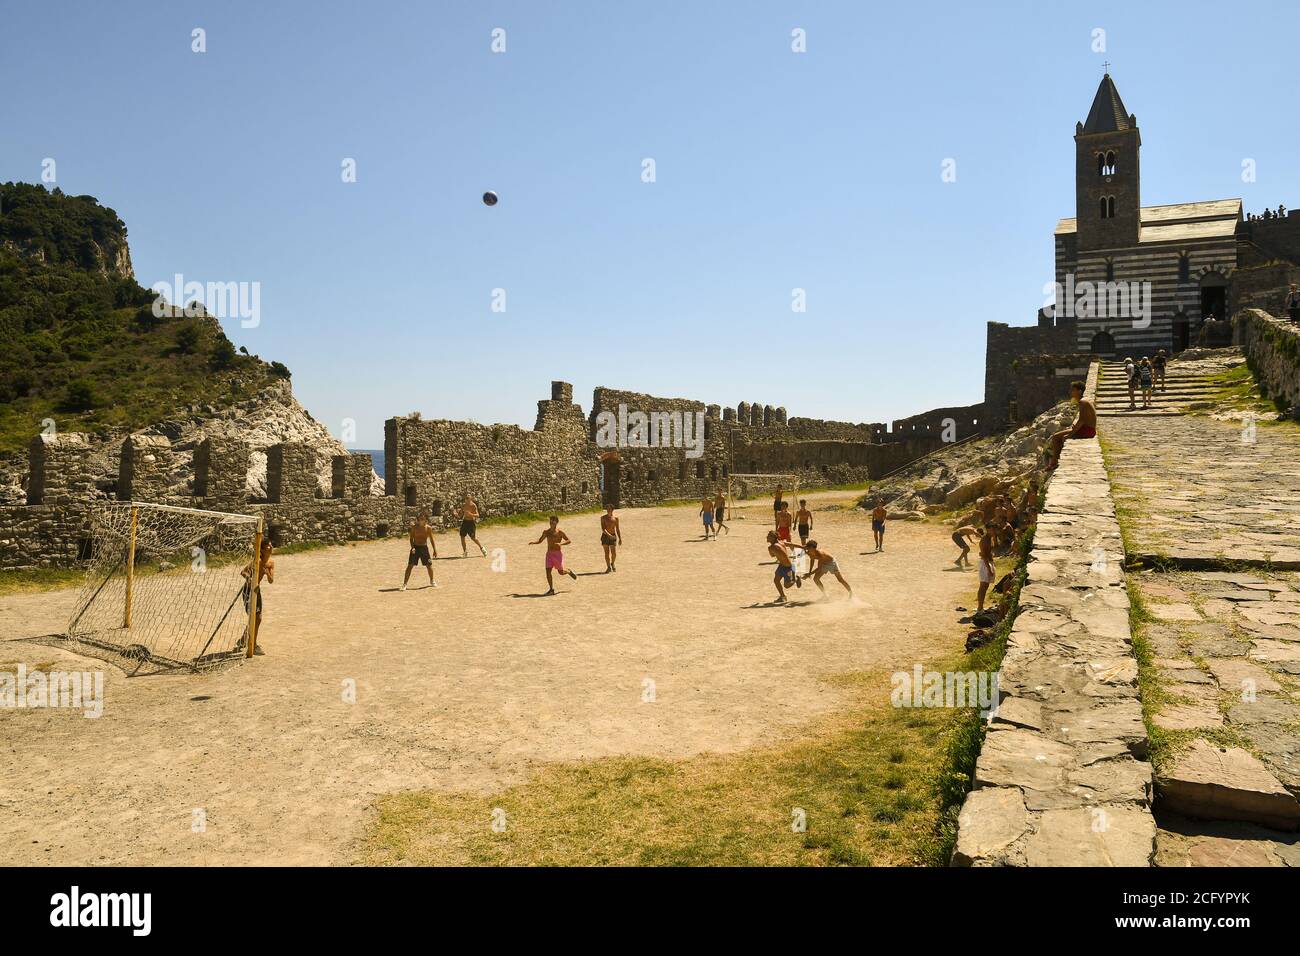 A group of boys playing football in the churchyard of the famous gothic Church of Saint Peter on a summer day, Porto Venere, La Spezia, Liguria, Italy Stock Photo